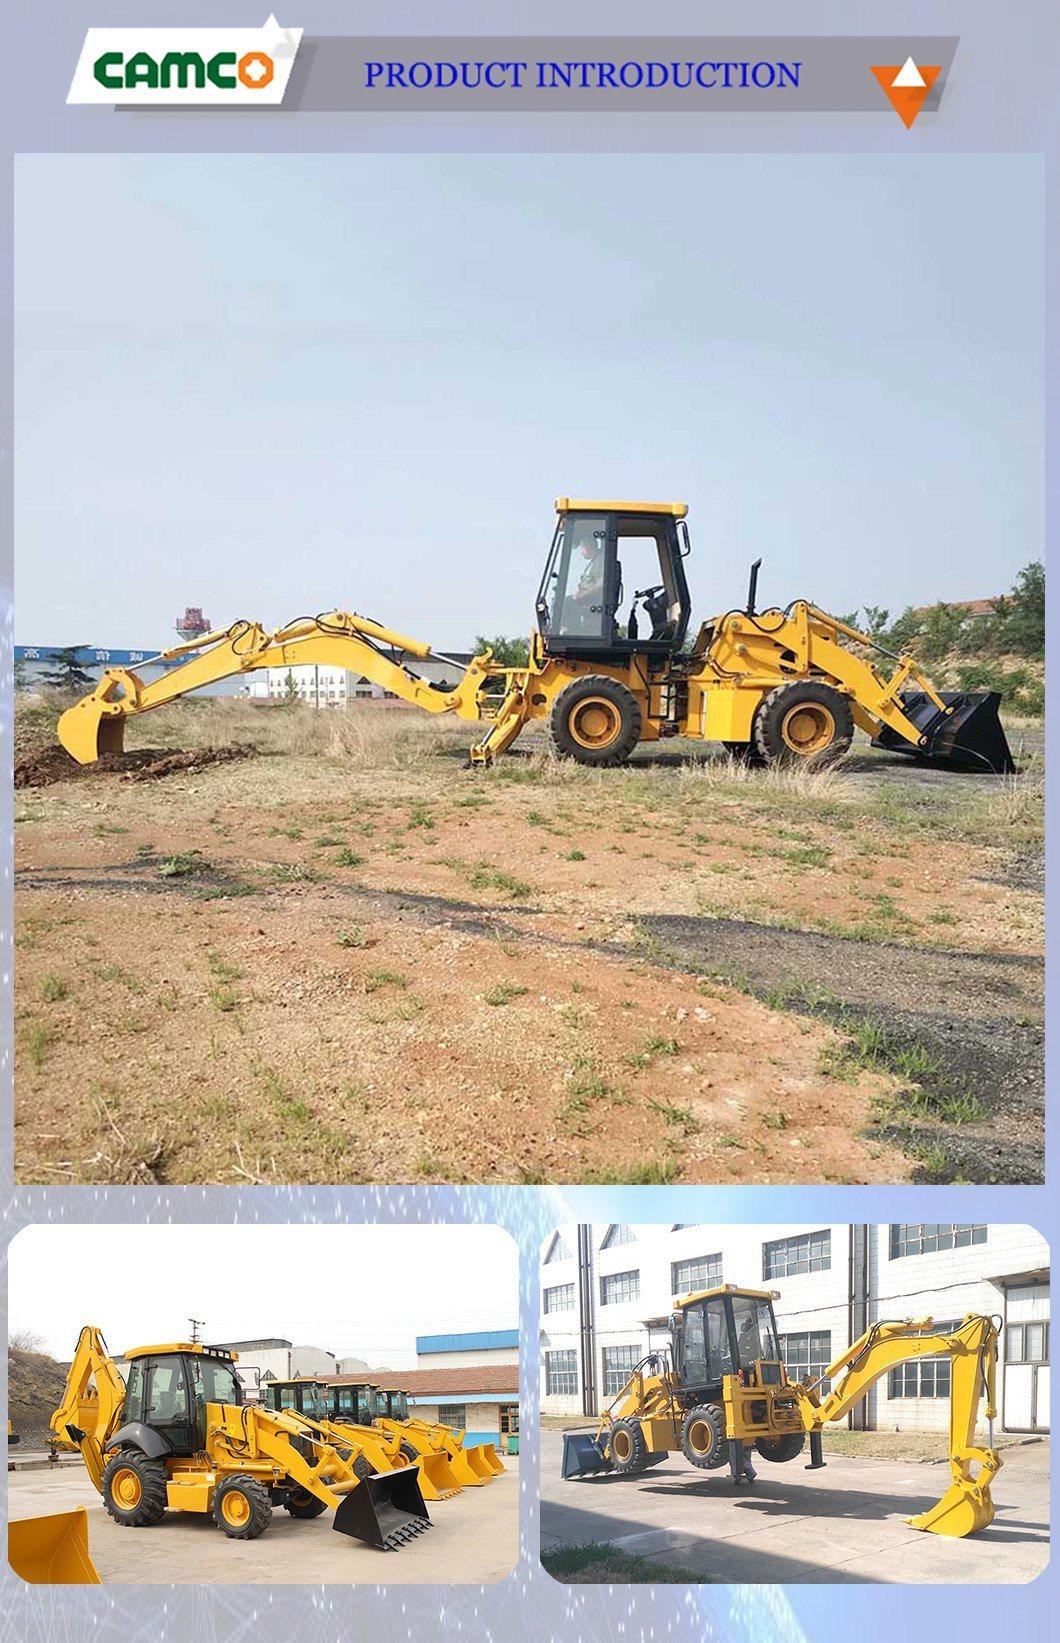 China Heavy Duty Construction Equipment Supplier Mini Front Loading End Excavator Digger 2.5 Ton Loading Machinery Backhoe Loader Backhoe for Sale